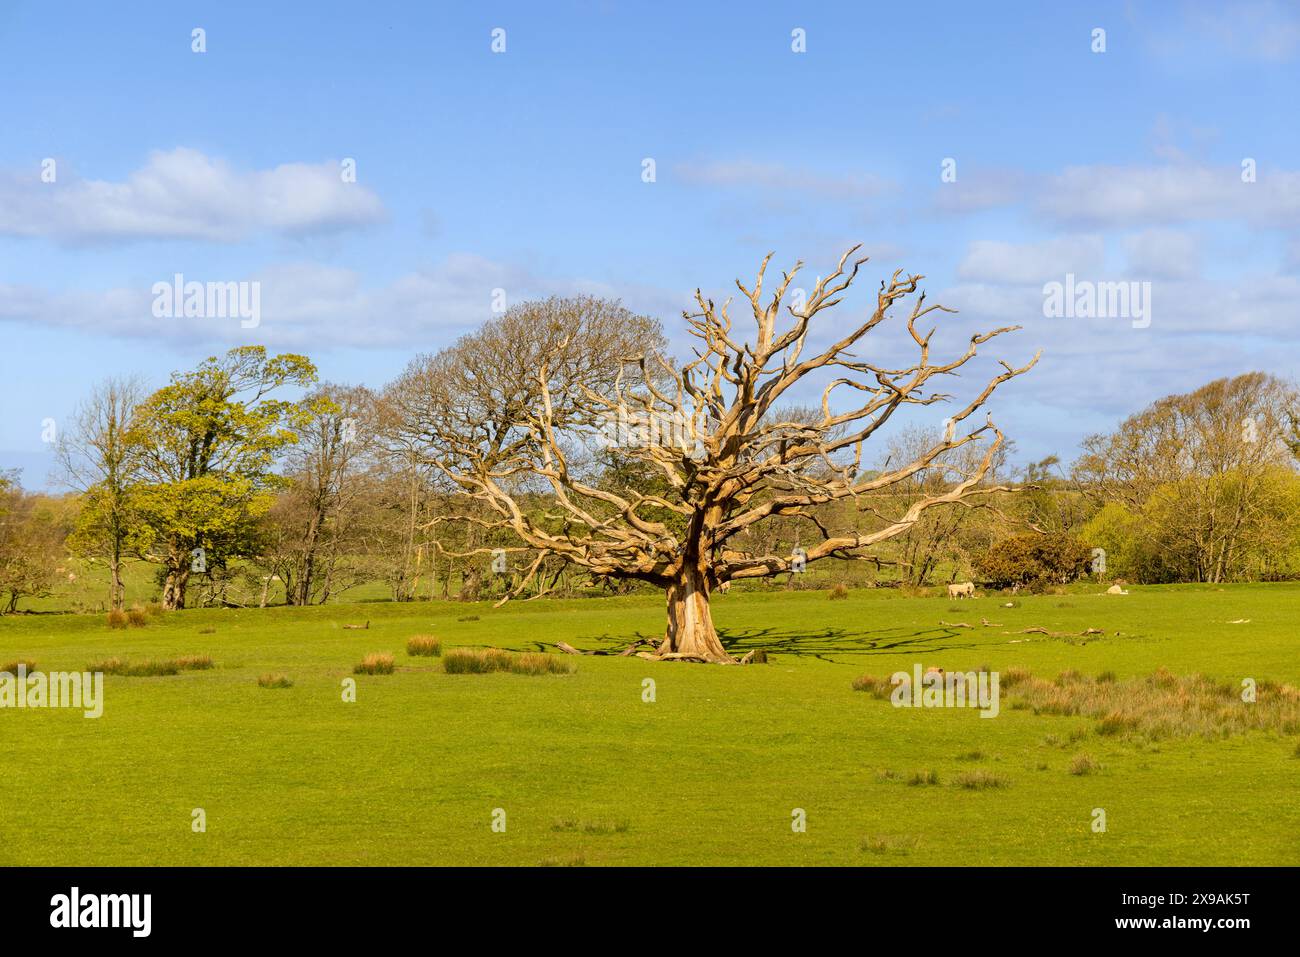 A skeletal tree in the Eskdale valley viewed from the Ravenglass and Eskdale Railway in the Lake District National Park, Cumbria, England, UK. Stock Photo